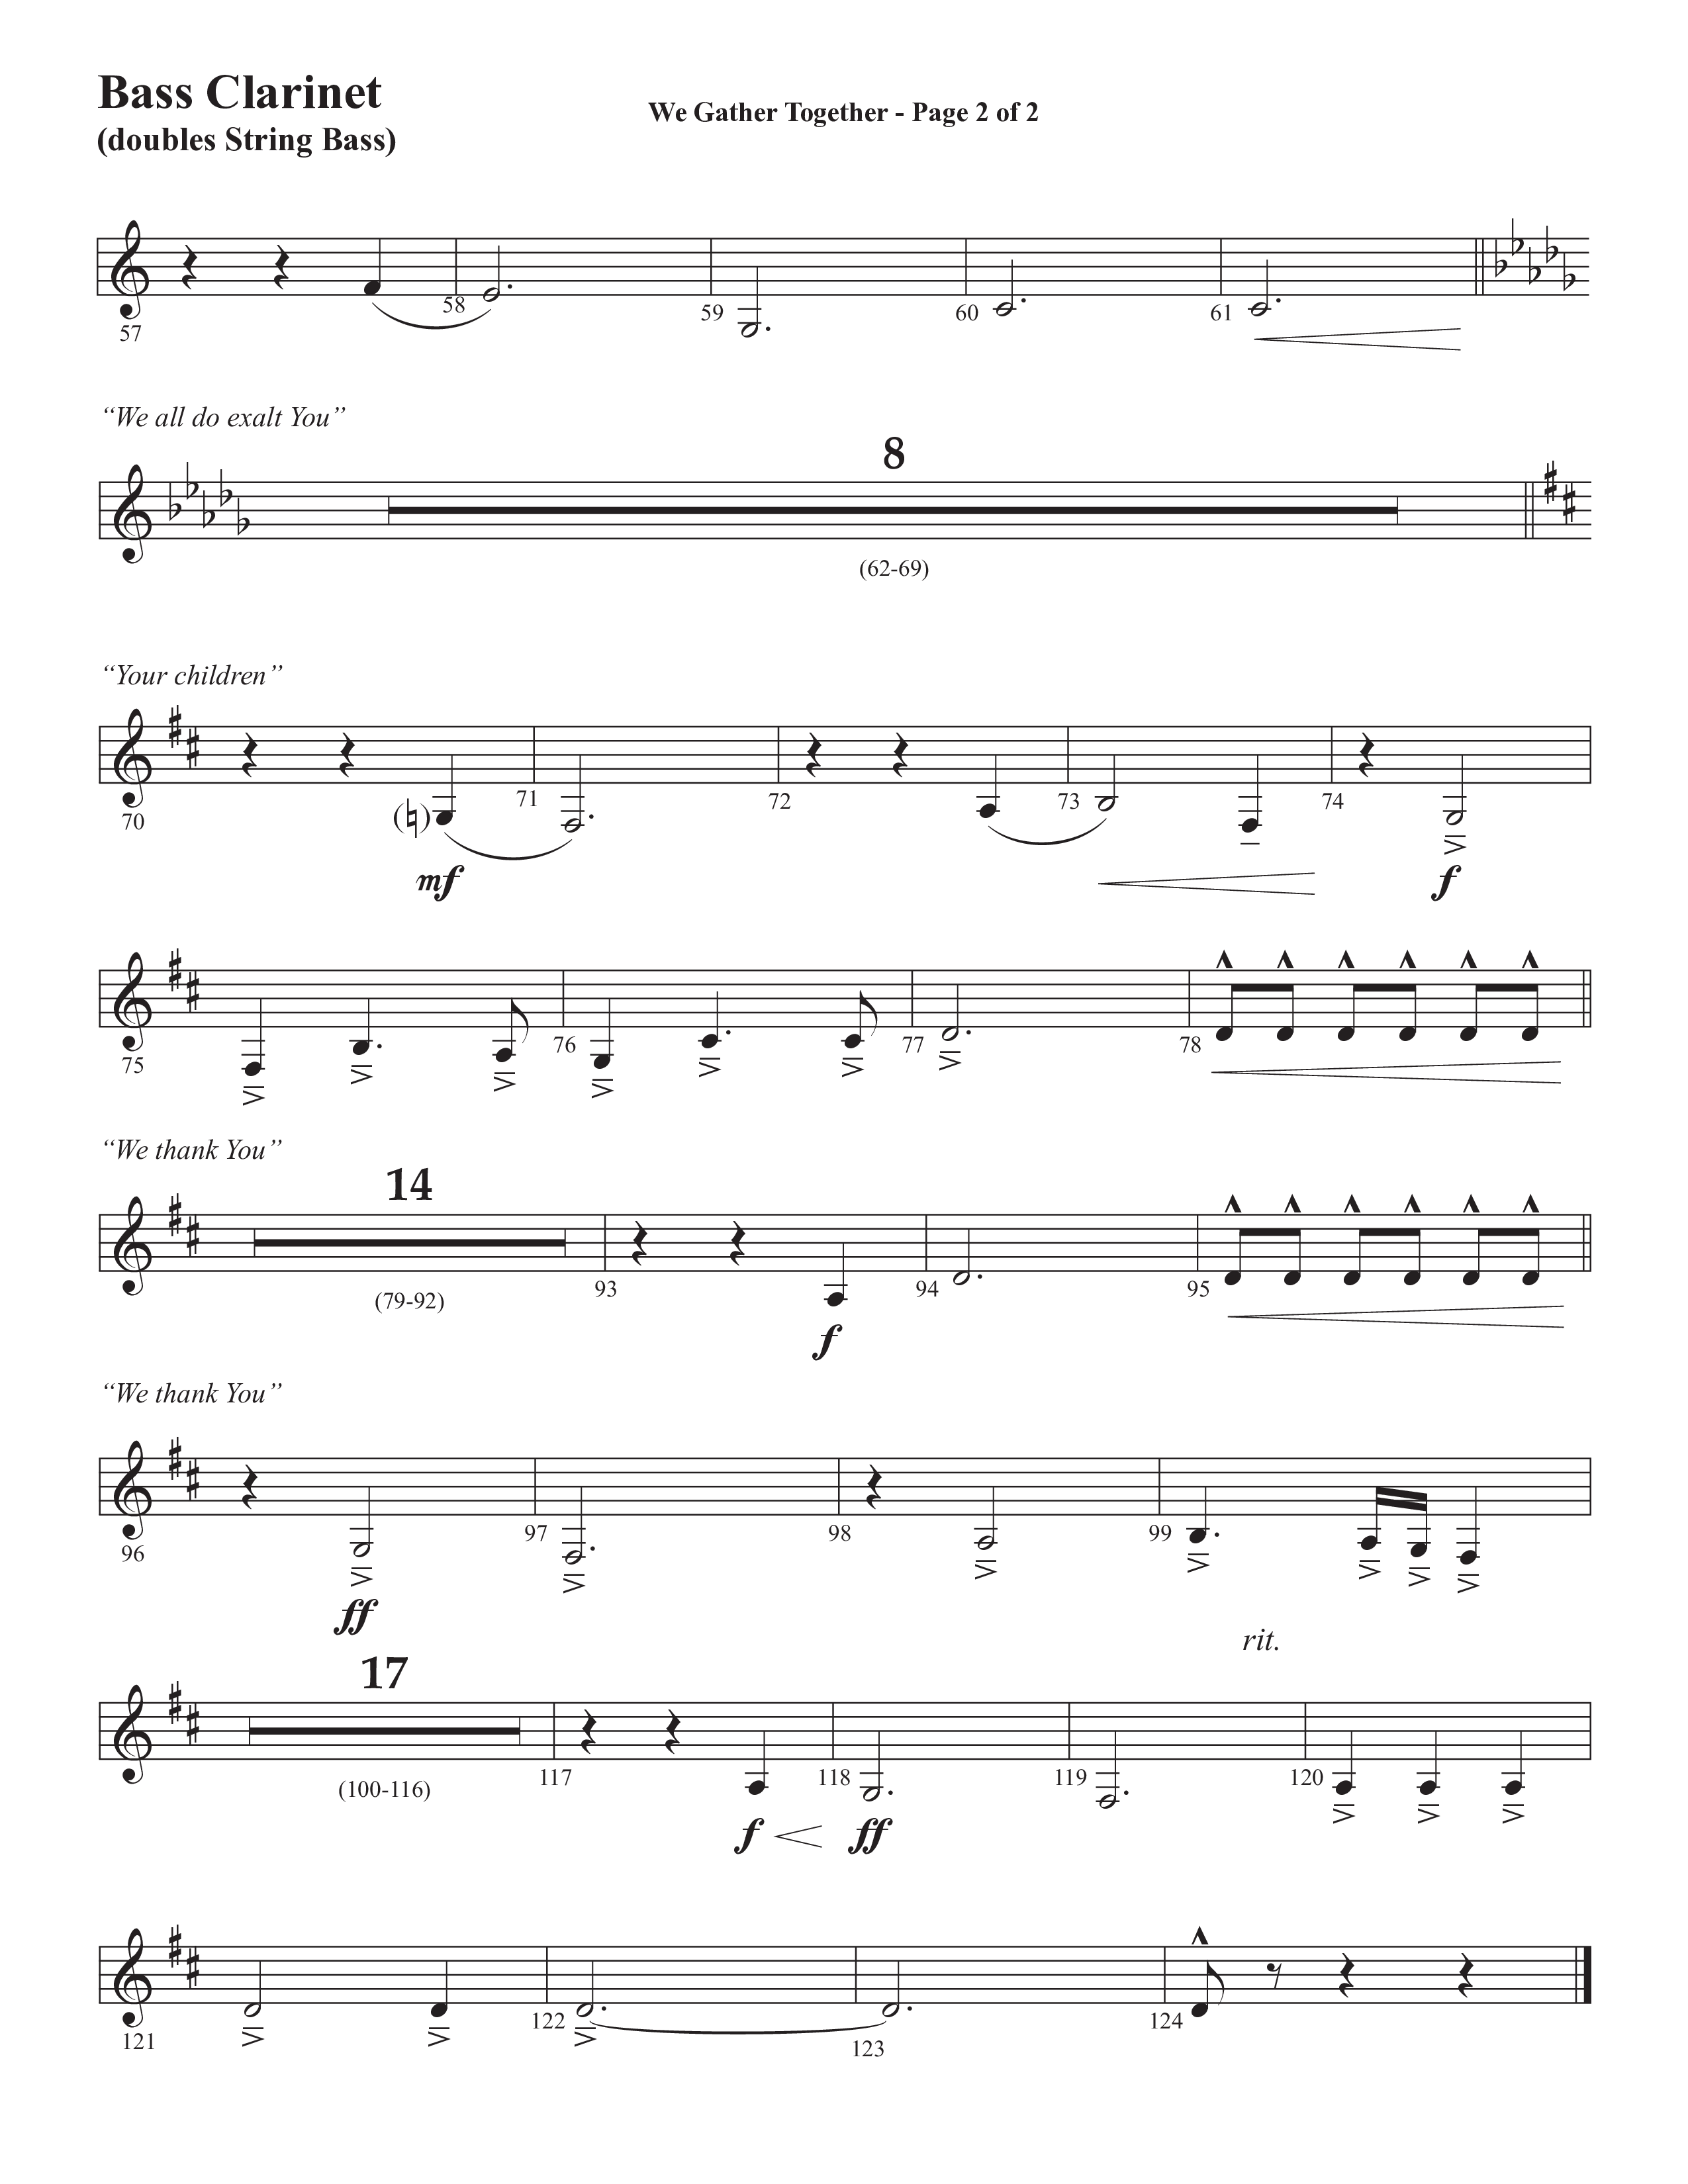 We Gather Together (We Thank You) (Choral Anthem SATB) Bass Clarinet (Semsen Music / Arr. John Bolin / Orch. Cliff Duren)